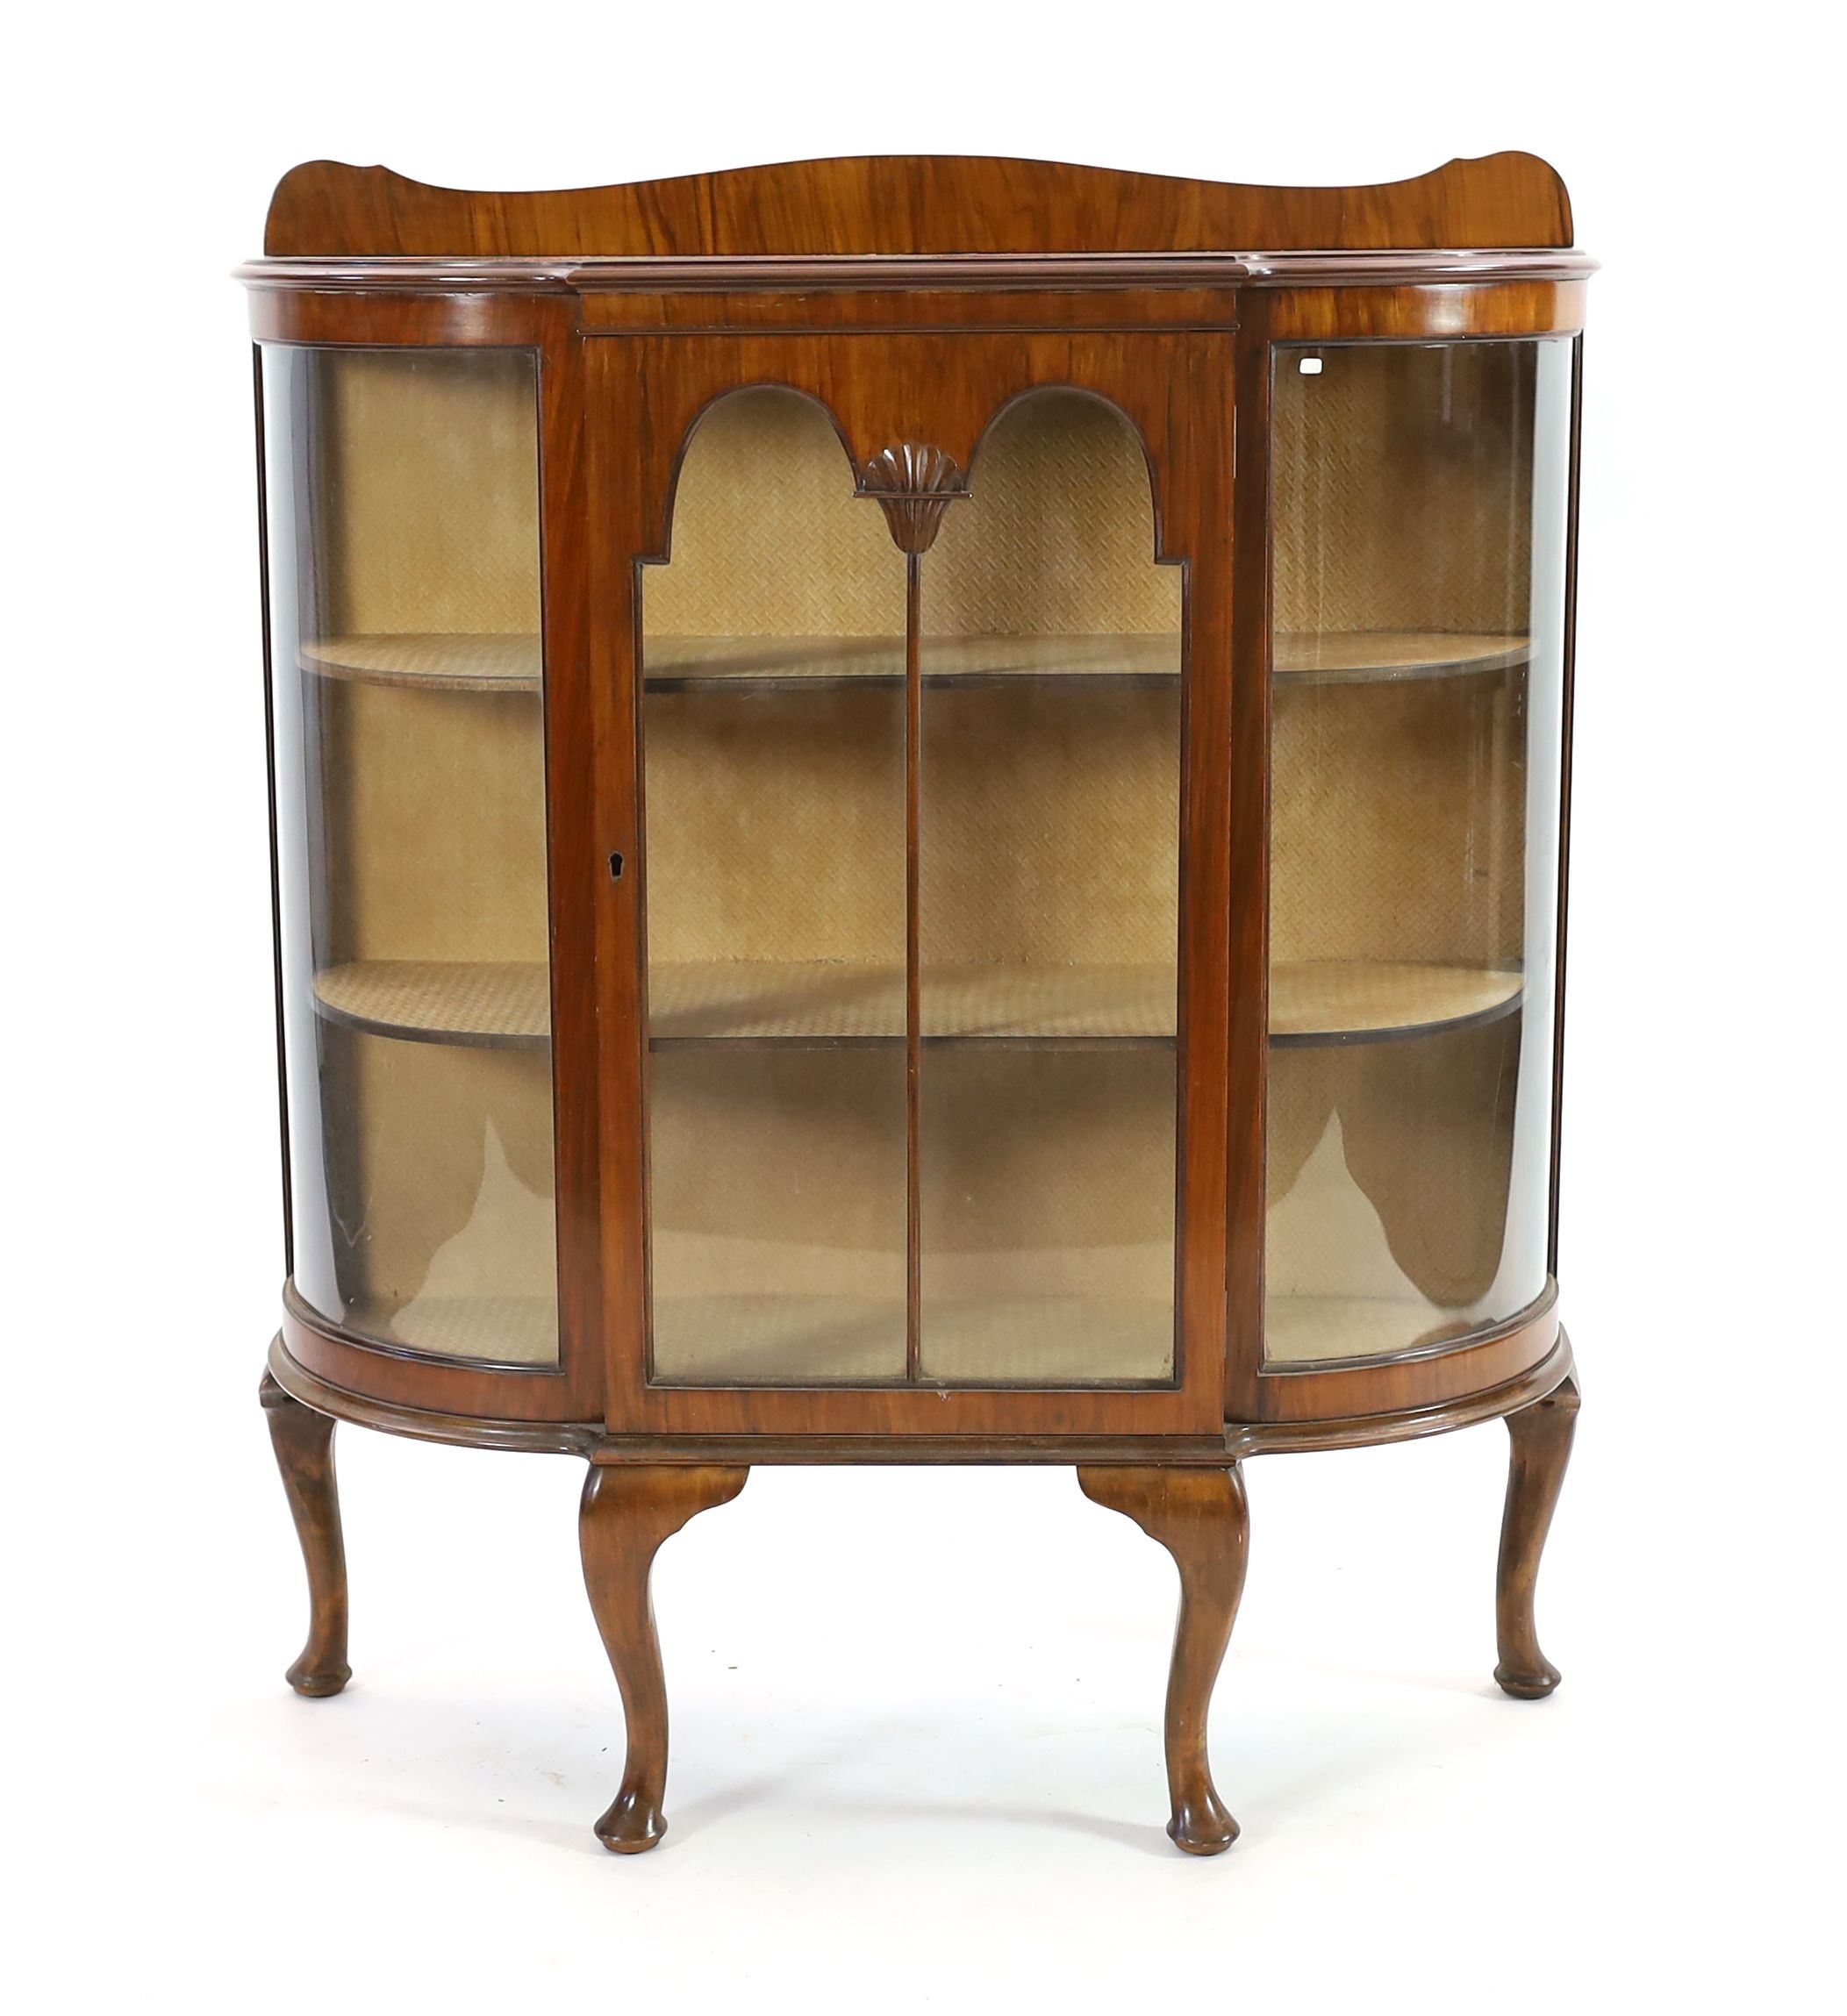 An early 20th century walnut bowfront display cabinet, width 106cm depth 38cm height 126cm